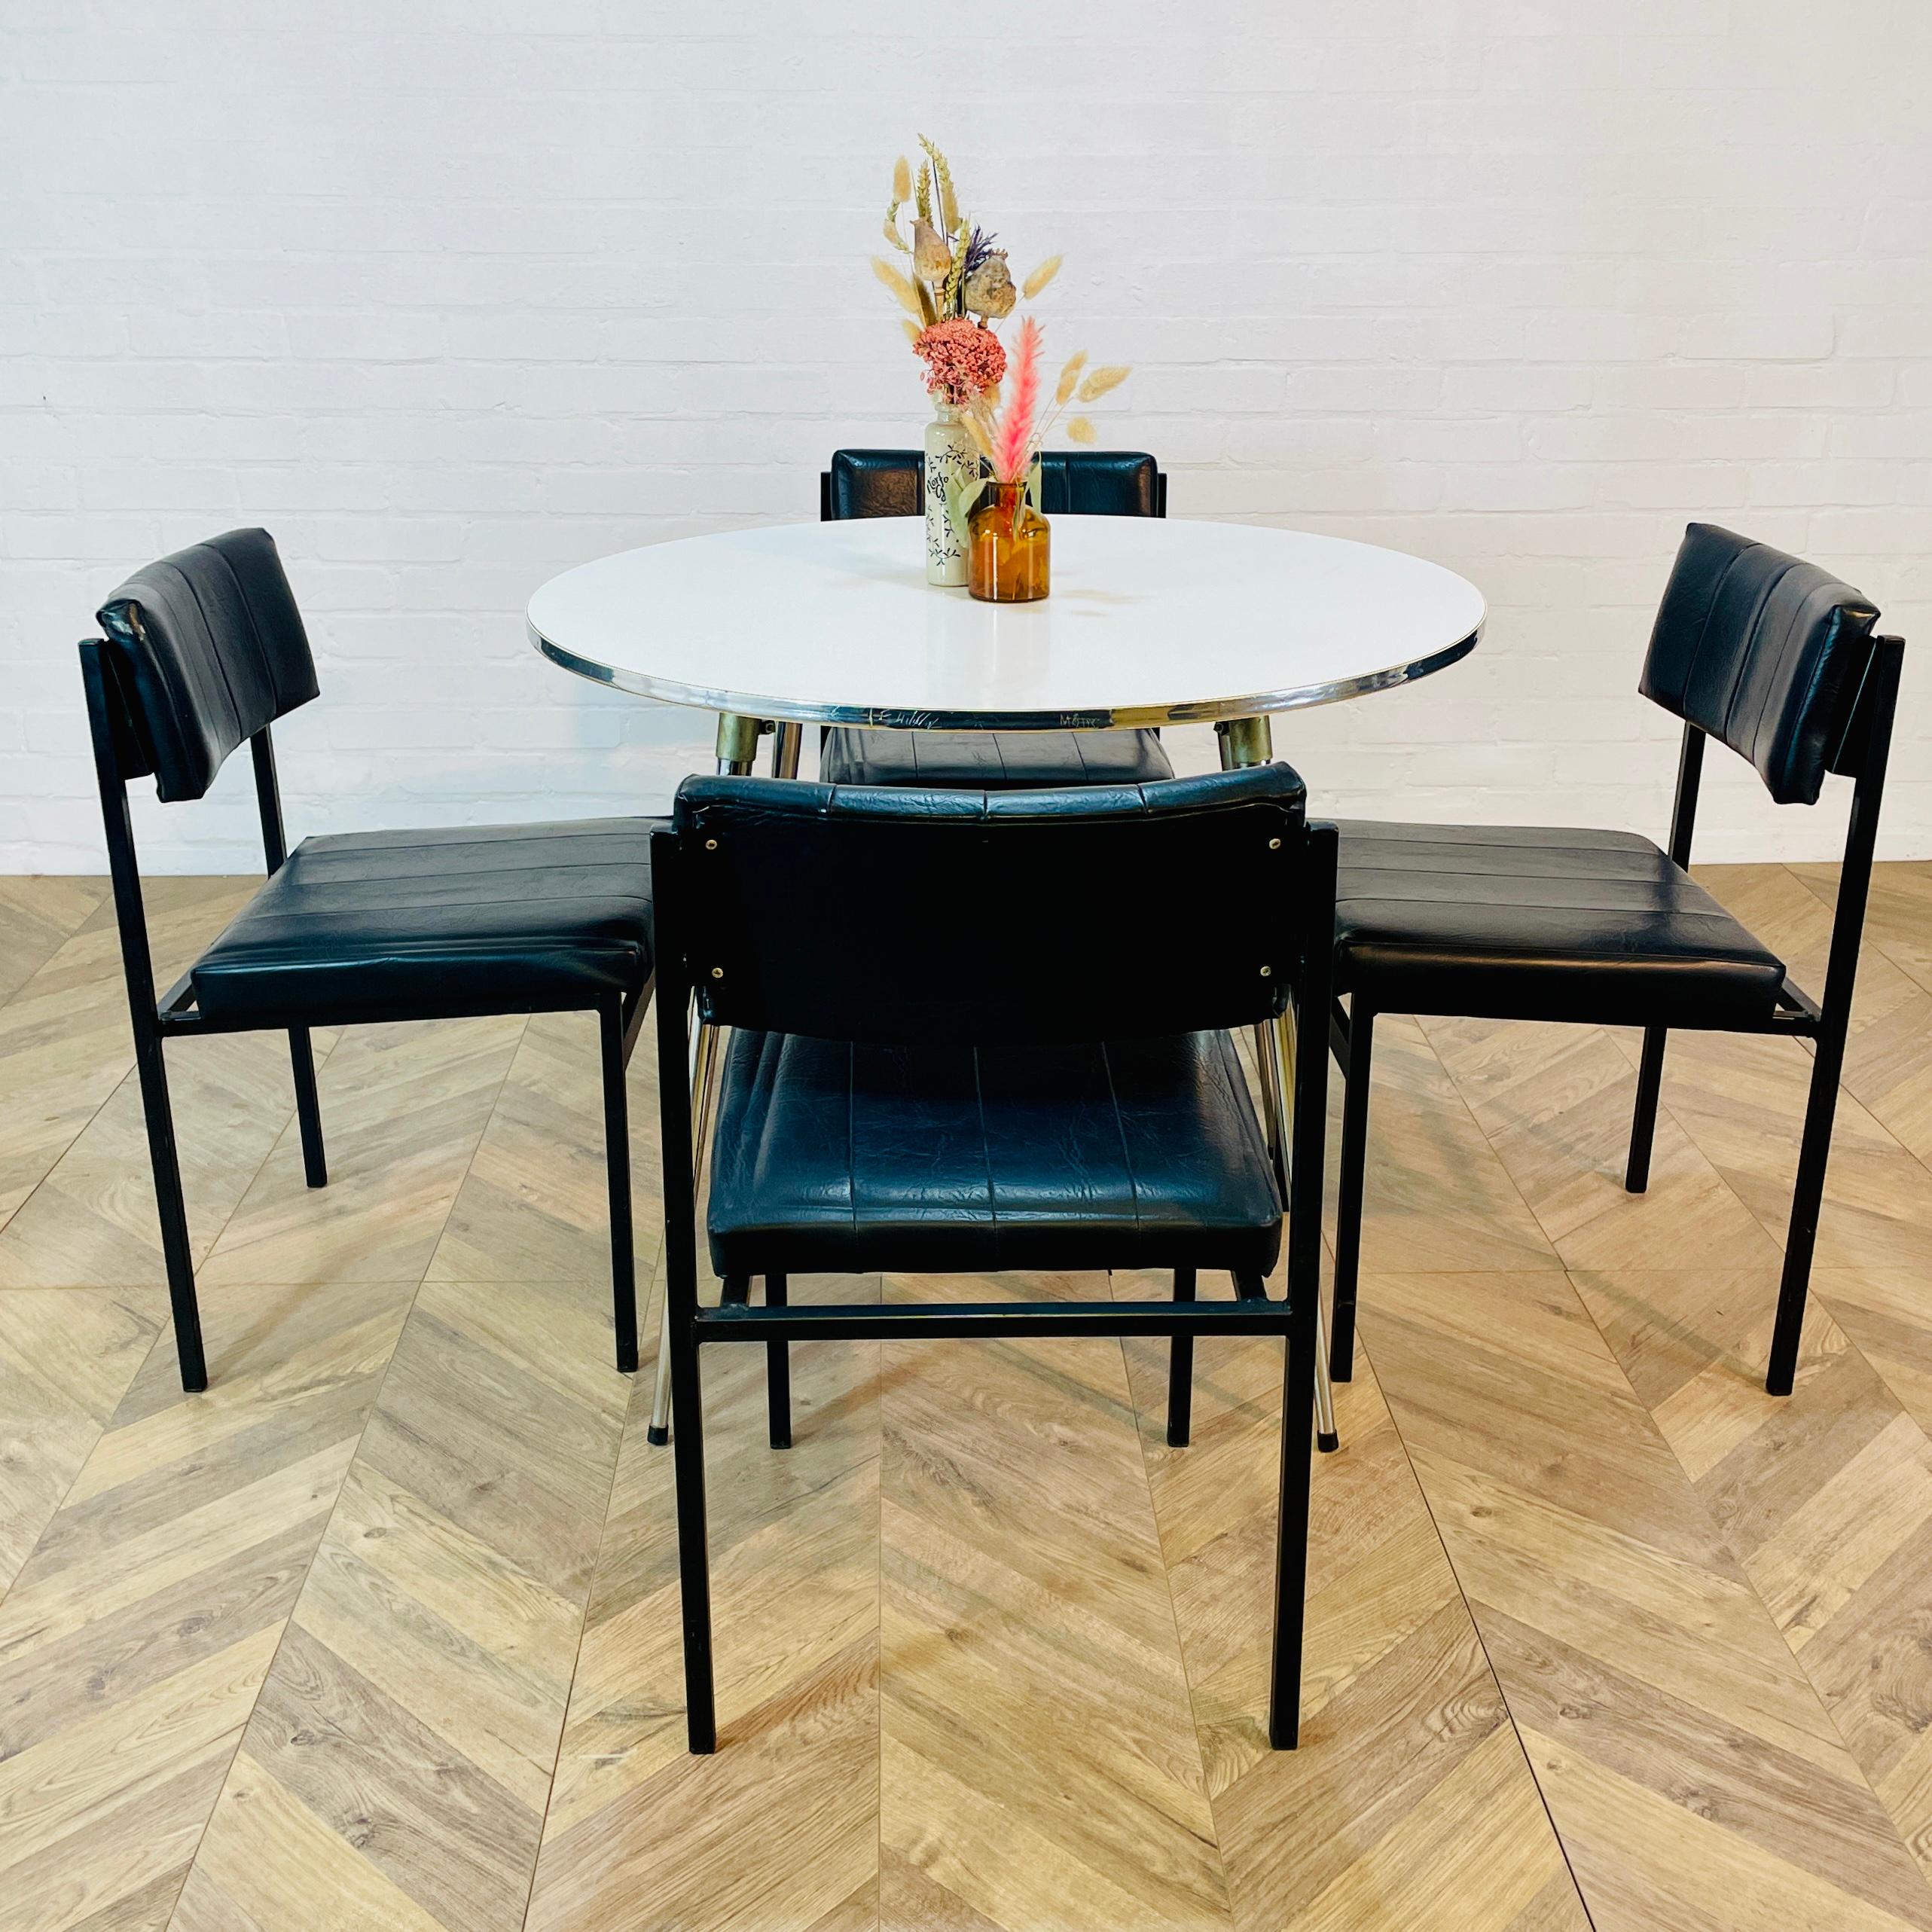 A Set of 4 Mid Century Black Dining Chairs, Designed by Godfrey Syrett, Circa 1960s.

The chairs, which have original black vinyl upholstery and black metal frames, all are in good condition, with only age related marks and scuffs to the frames and